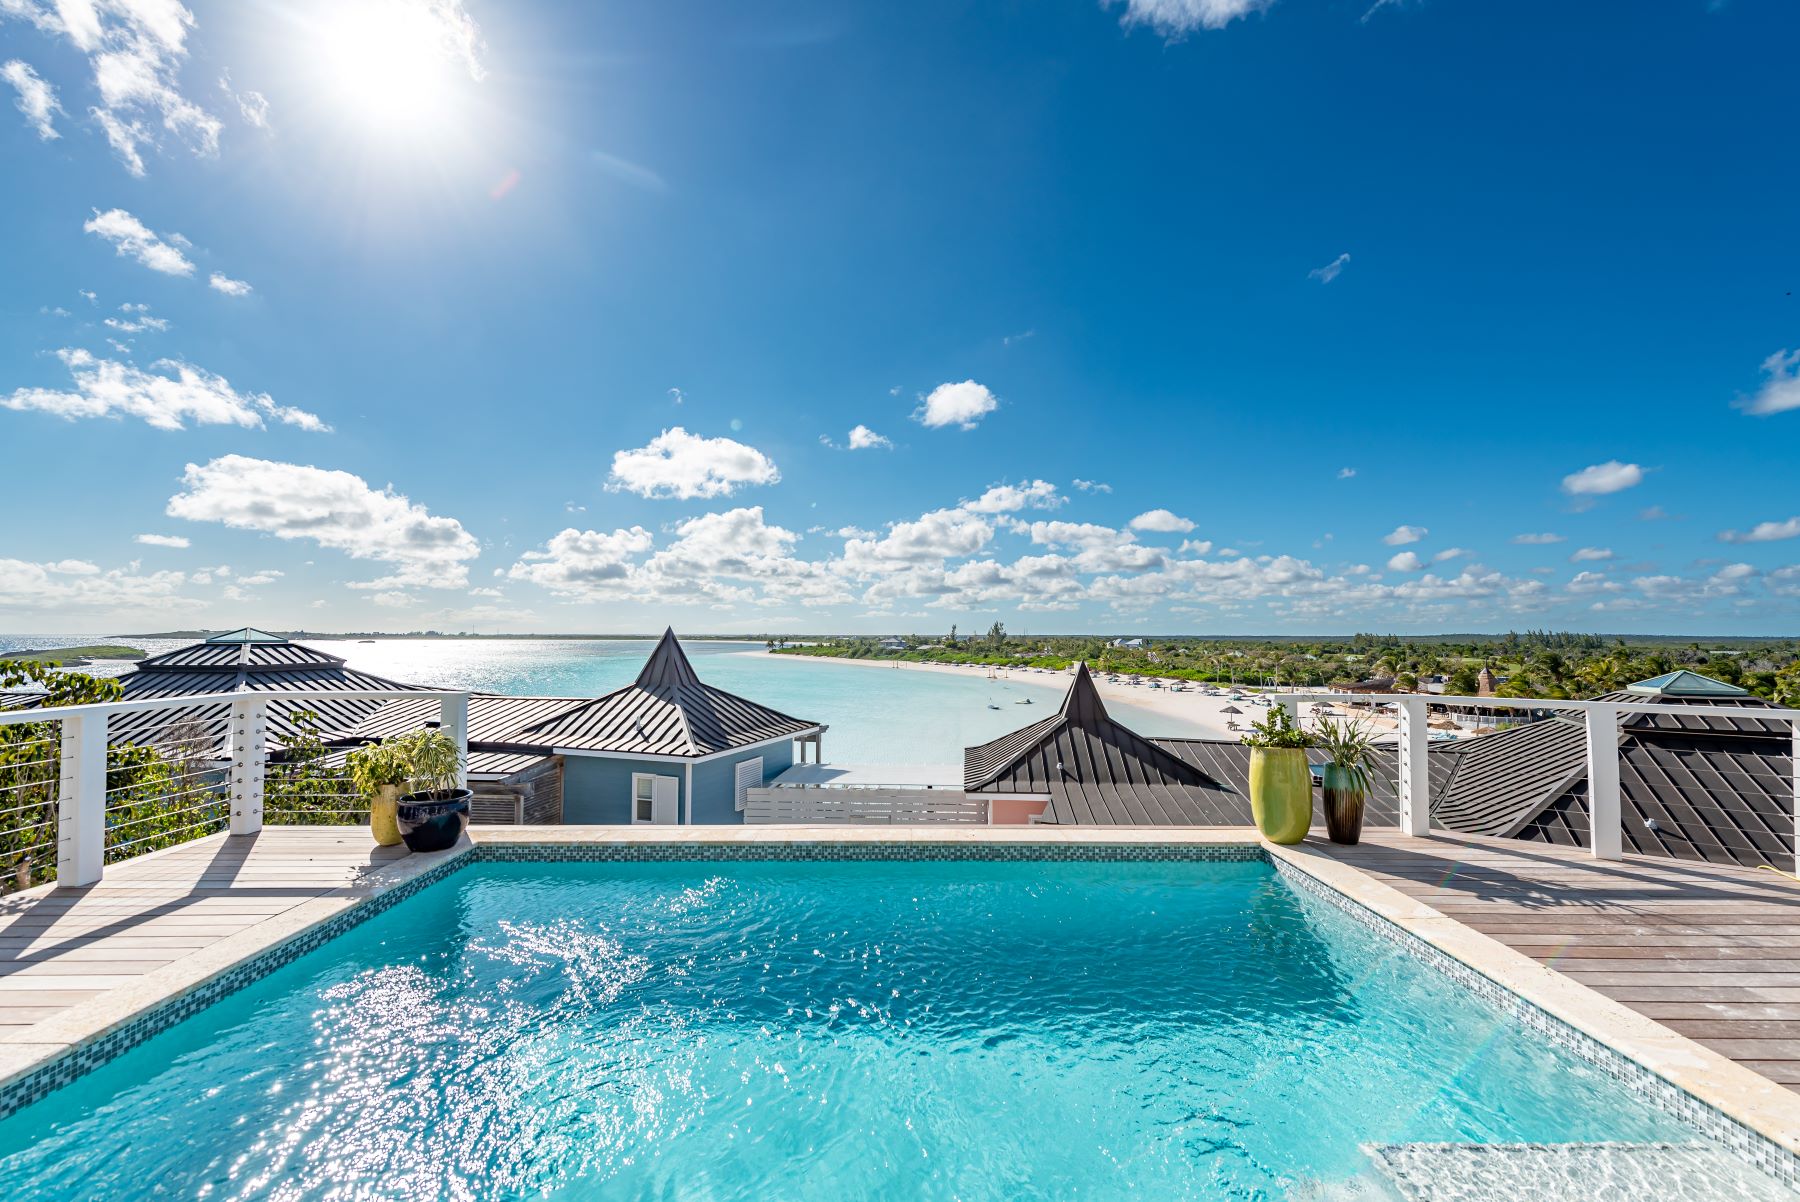 Inifinity pool of a property at The Abaco Club The Cliffs neighborhood